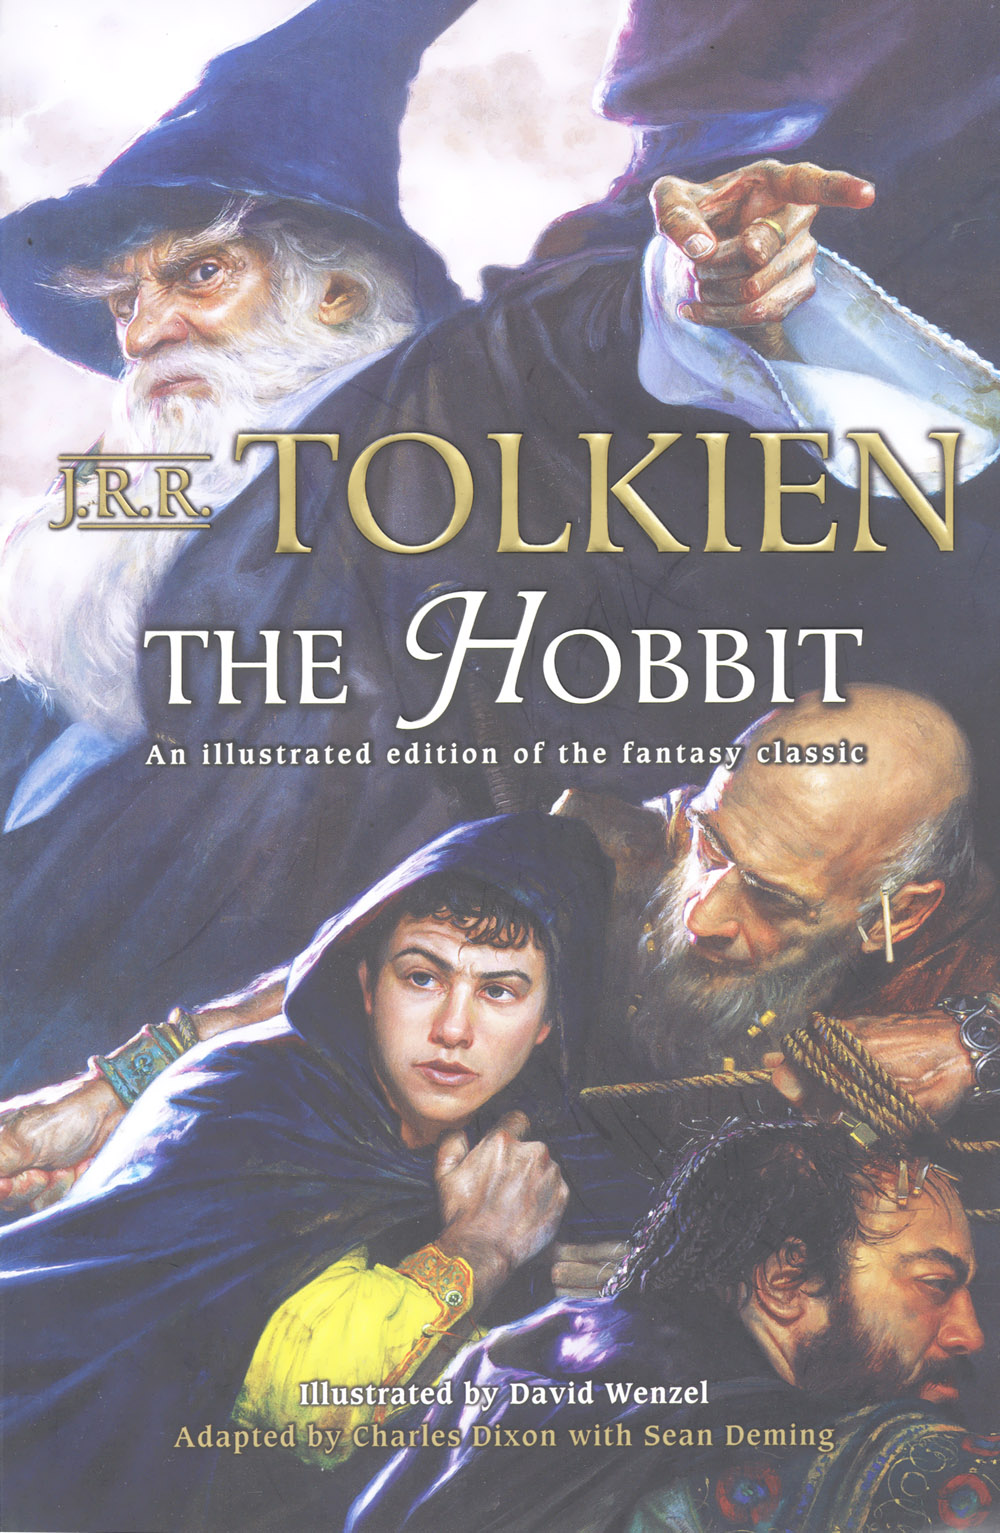 Read online The Hobbit comic -  Issue # TPB - 1